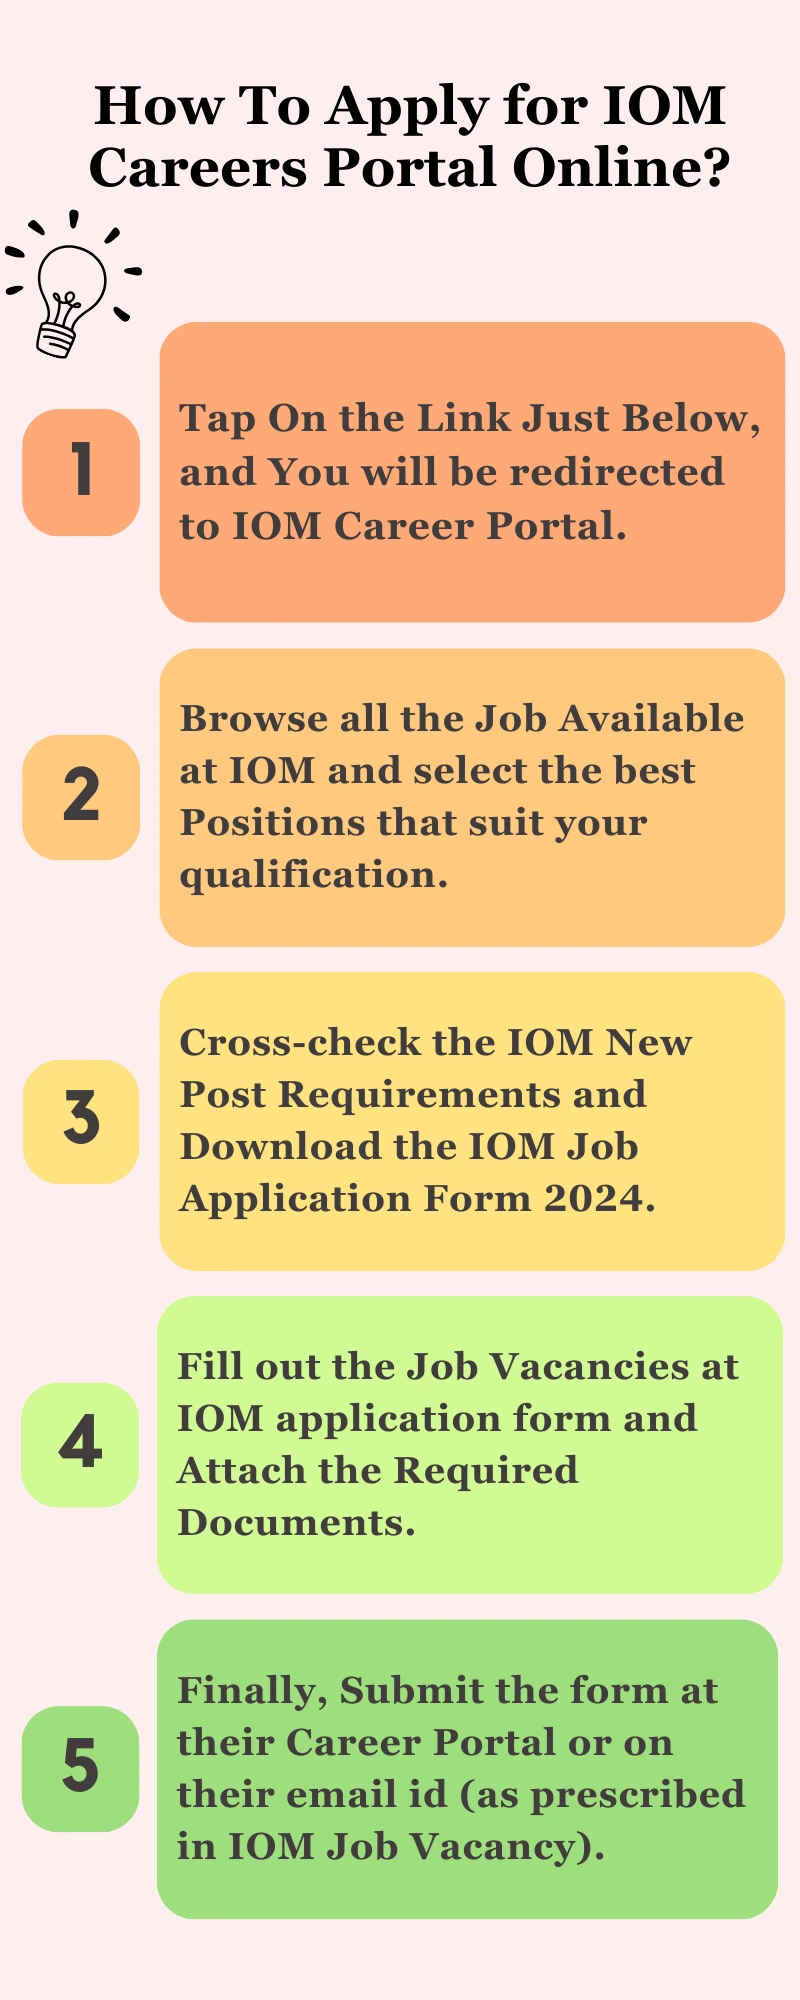 How To Apply for IOM Careers Portal Online?